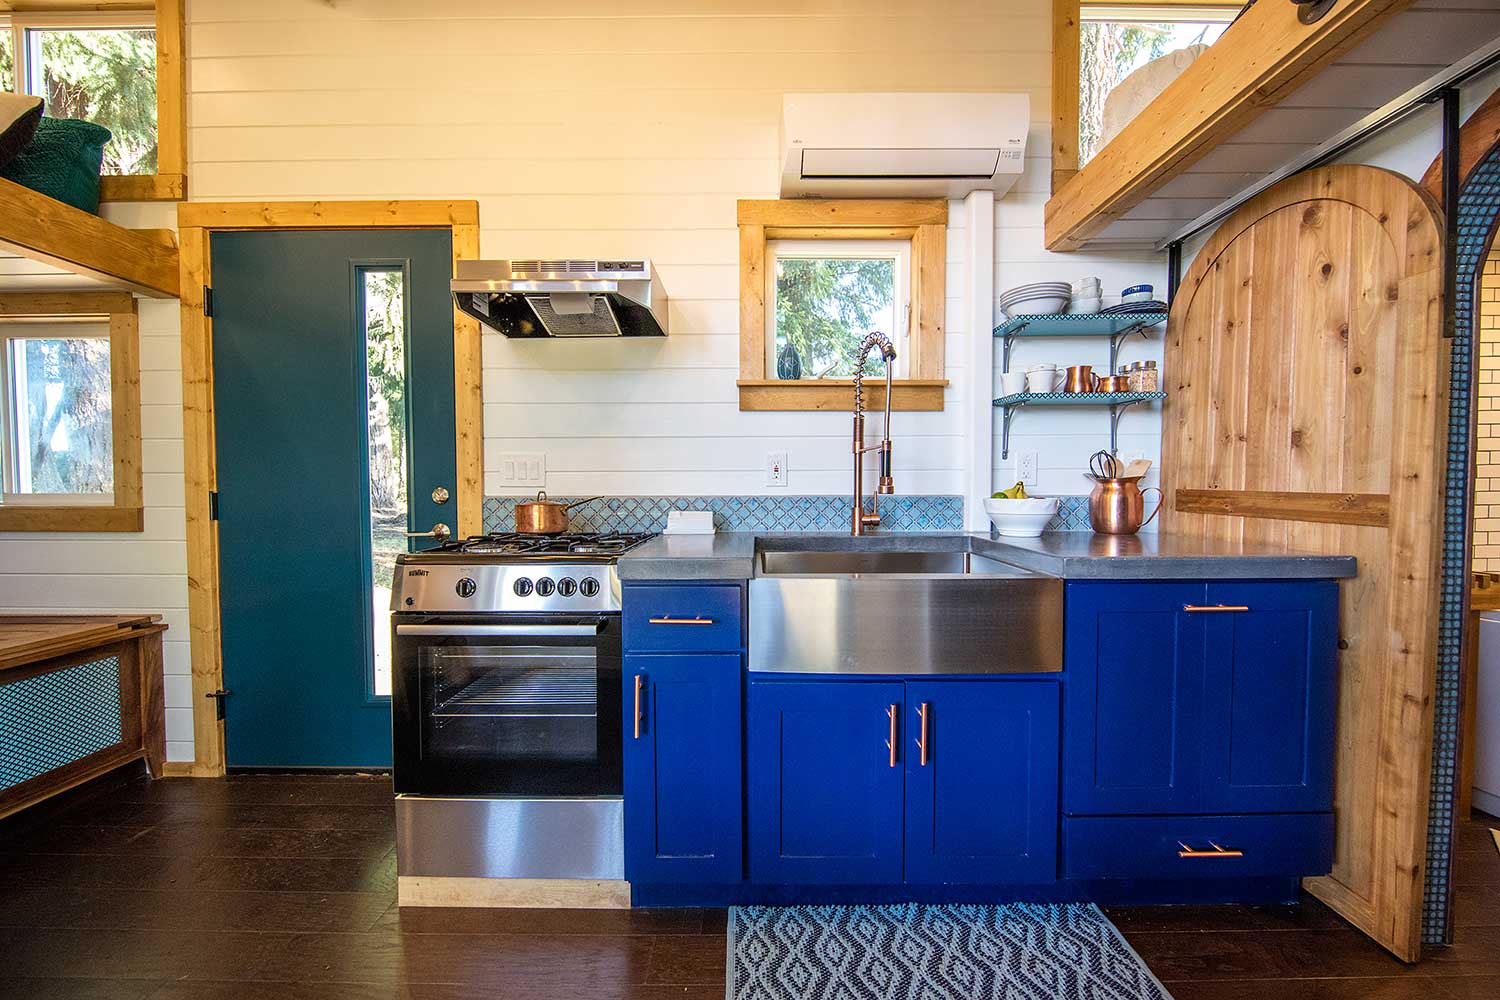 Kitchen in the Tiny Adventure Home with blue cabinets